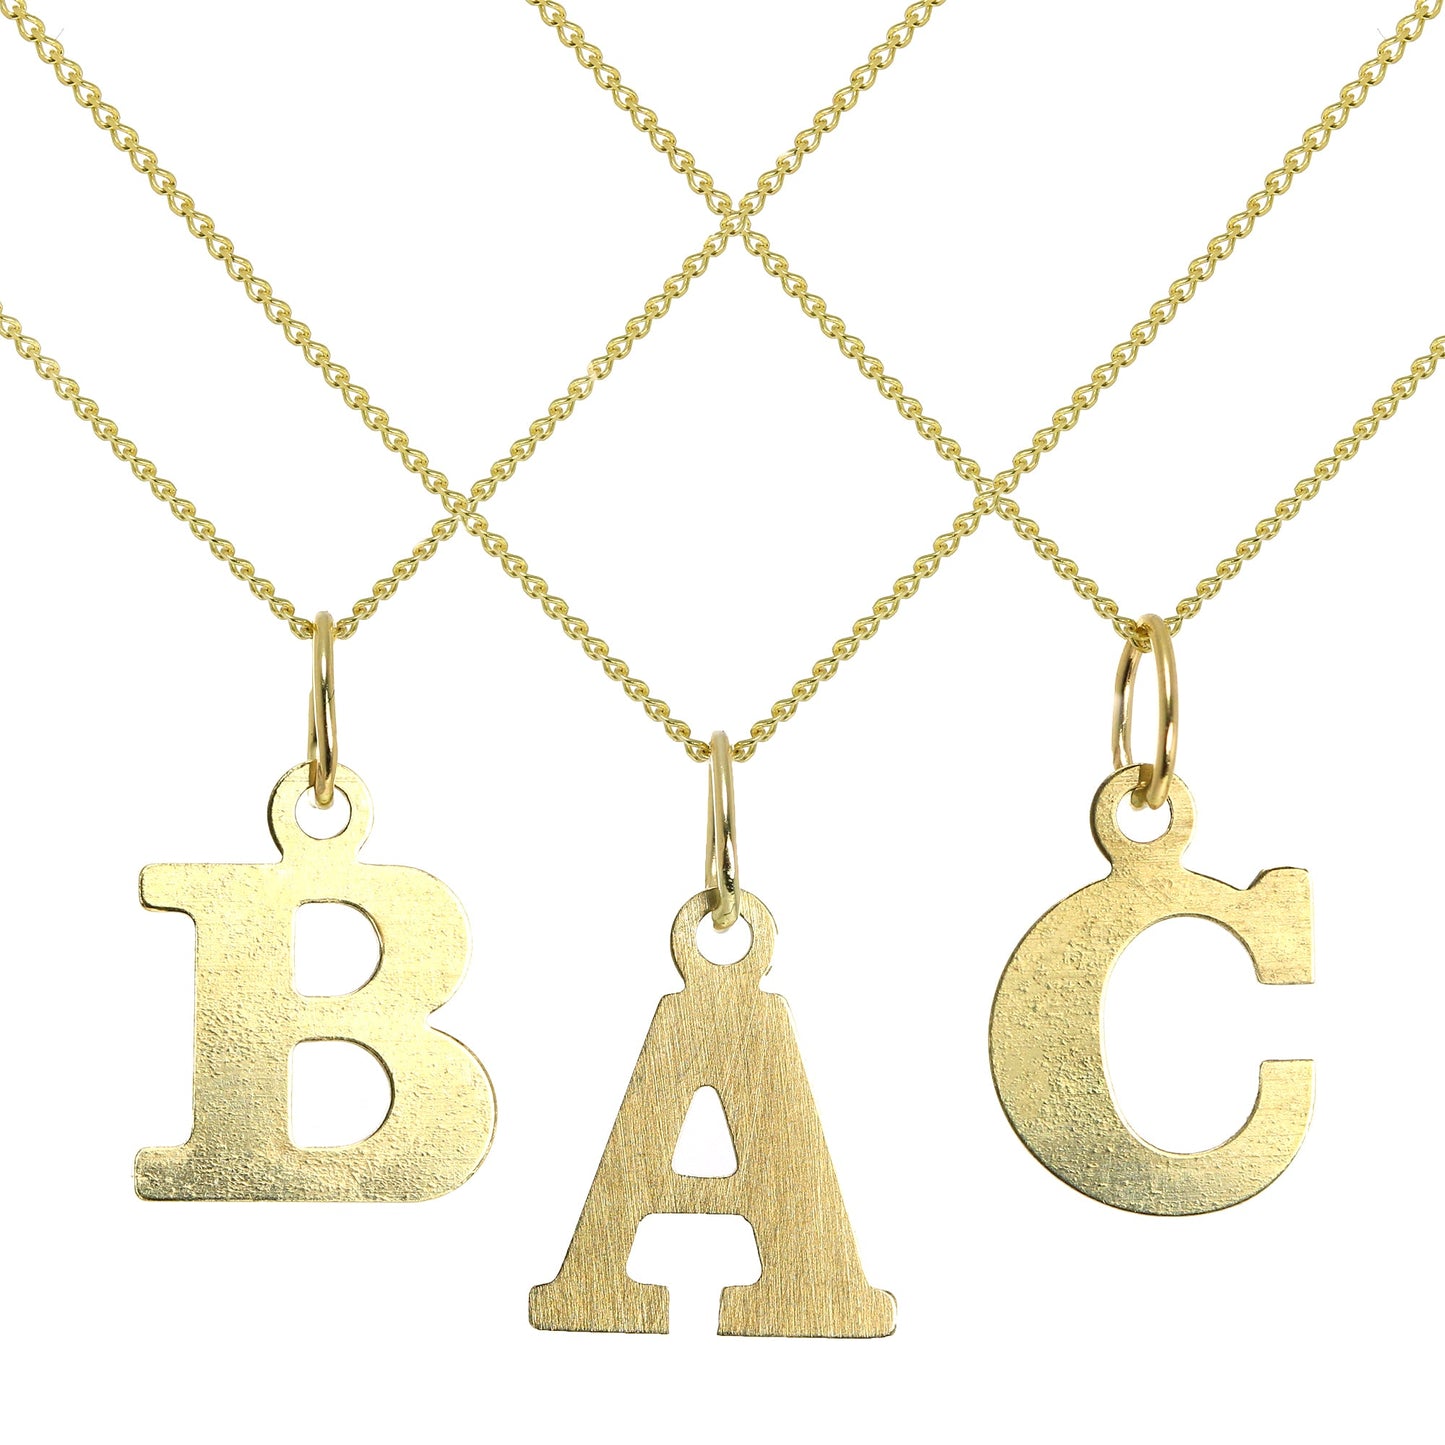 Lightweight Small 9ct Gold Initial Letter Charms Necklace A-Z